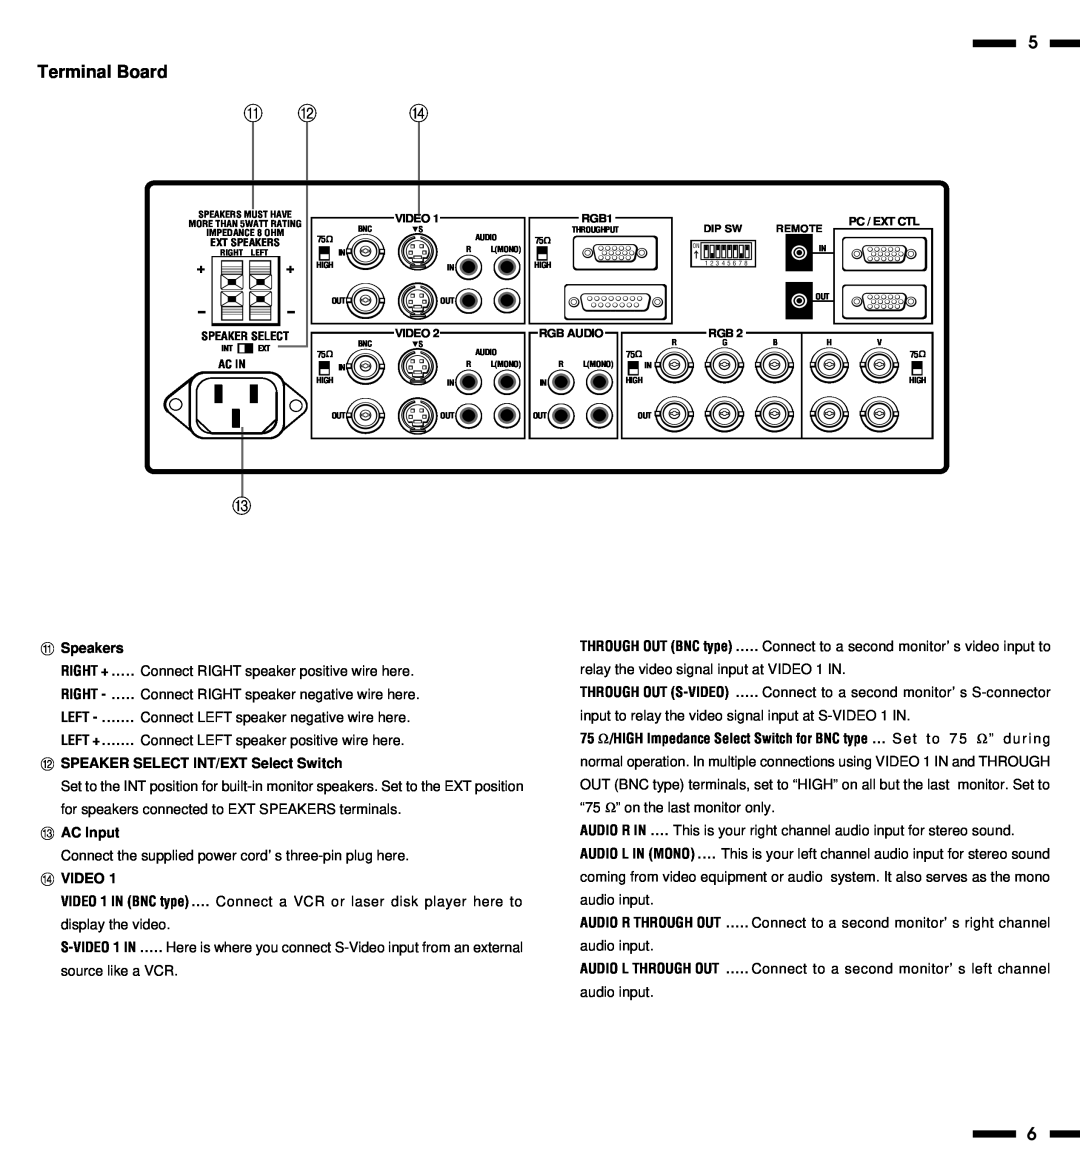 NEC XP29, XM29 Plus user manual A B D, Terminal Board, ASpeakers, BSPEAKER SELECT INT/EXT Select Switch, CAC Input, Dvideo 